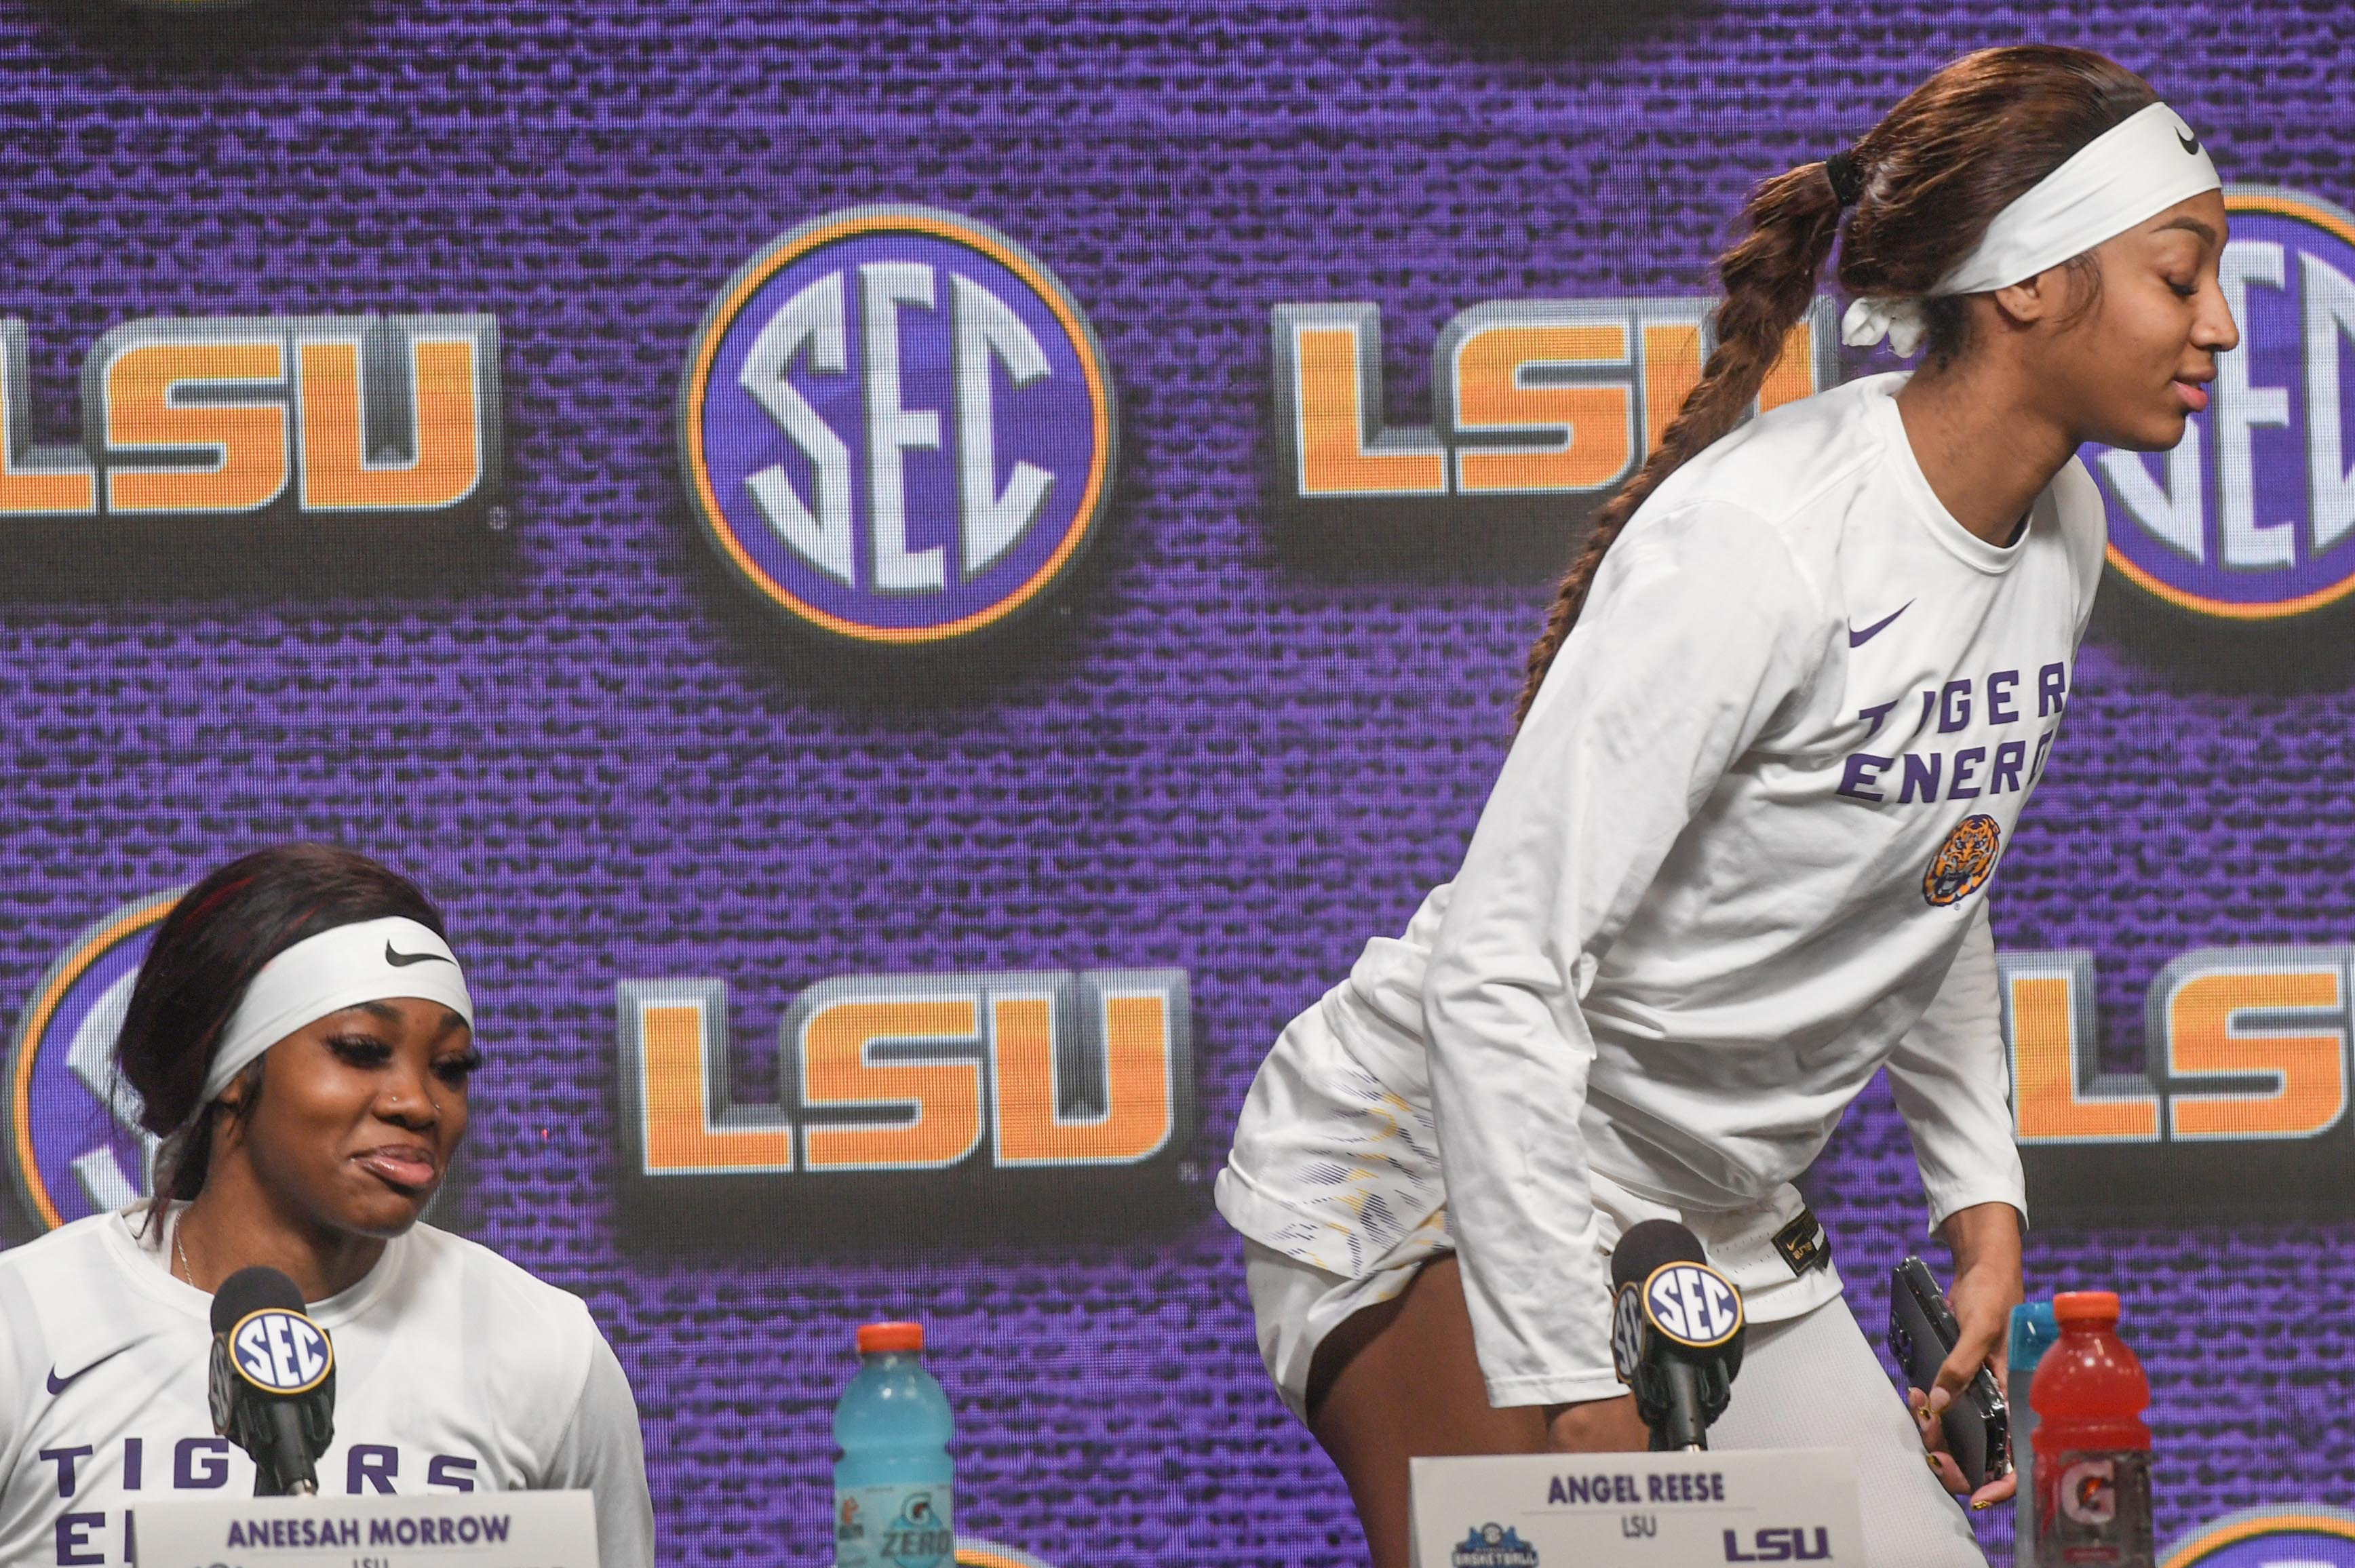 Louisiana State University forward Angel Reese, right, walks off stage after talking to media near teammate guard Aneesah Morrow, left, after LSU beat Ole Miss 75-67 at the SEC Women's Basketball Tournament game at the Bon Secours Wellness Arena in Greenville, S.C. Saturday, March 9, 2024.